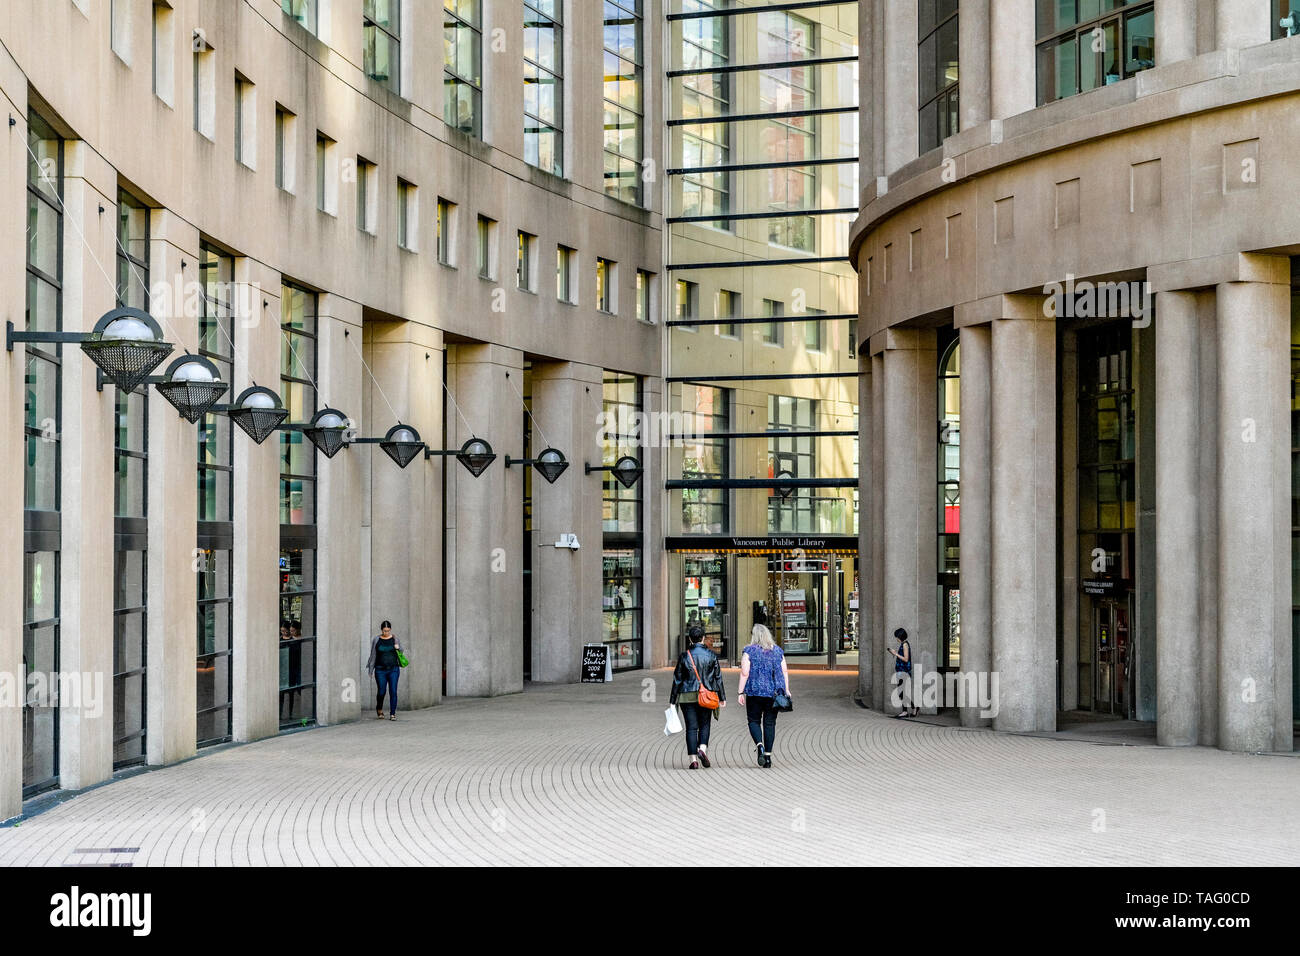 The main Vancouver Public Library, Vancouver, British Columbia, Canada Stock Photo